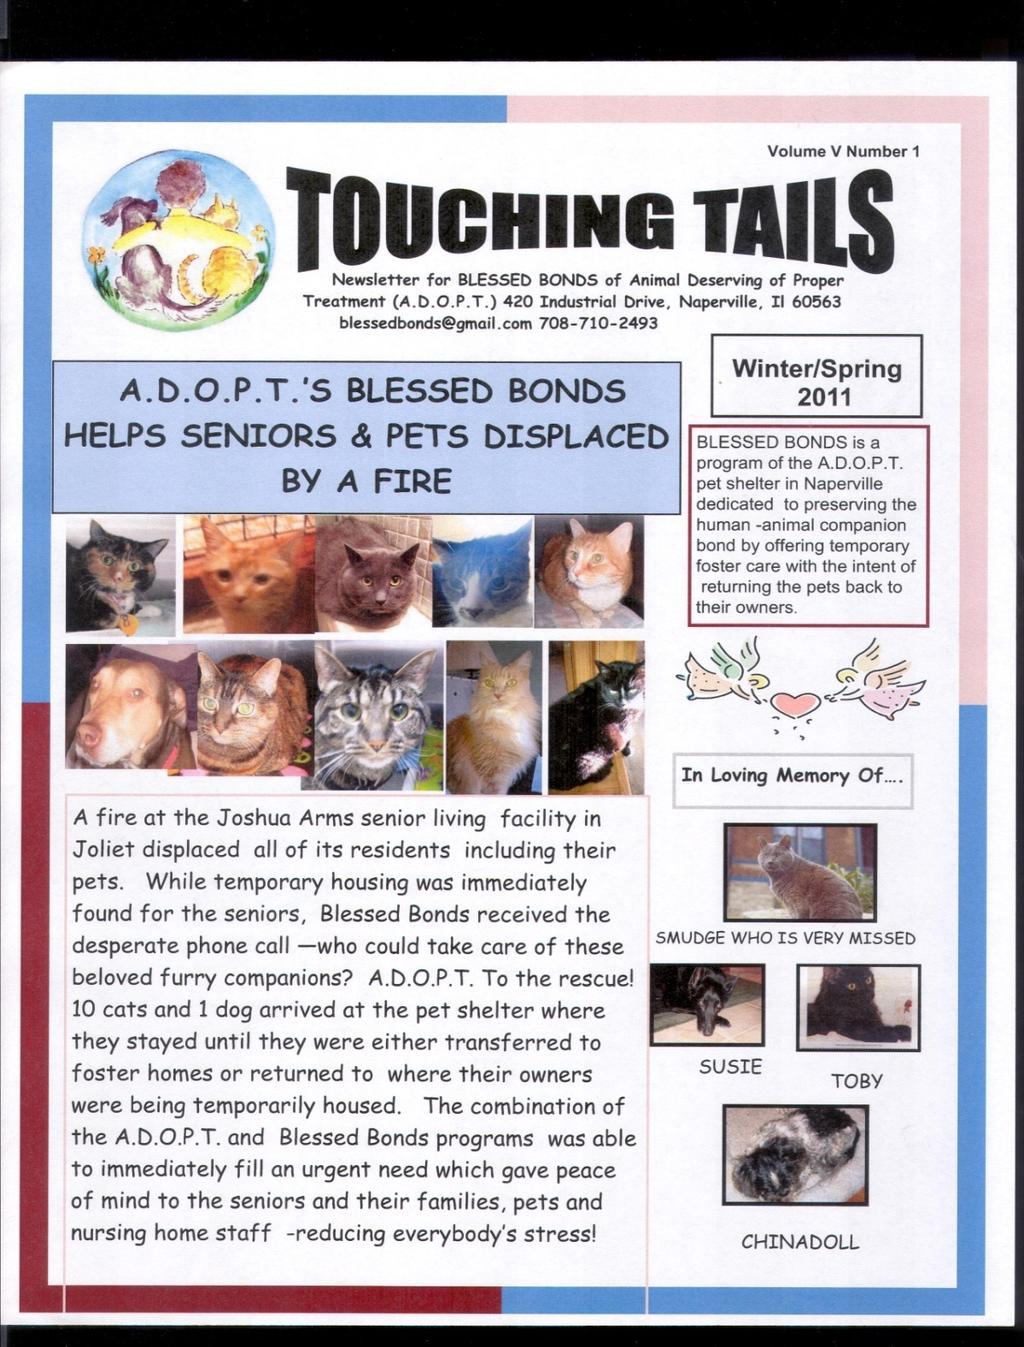 Creative Solutions to Keep Pets in Homes BLESSED BONDS and A.D.O.P.T. Blessed Bond s mission is to preserve the human-animal companion bond and promote its value.